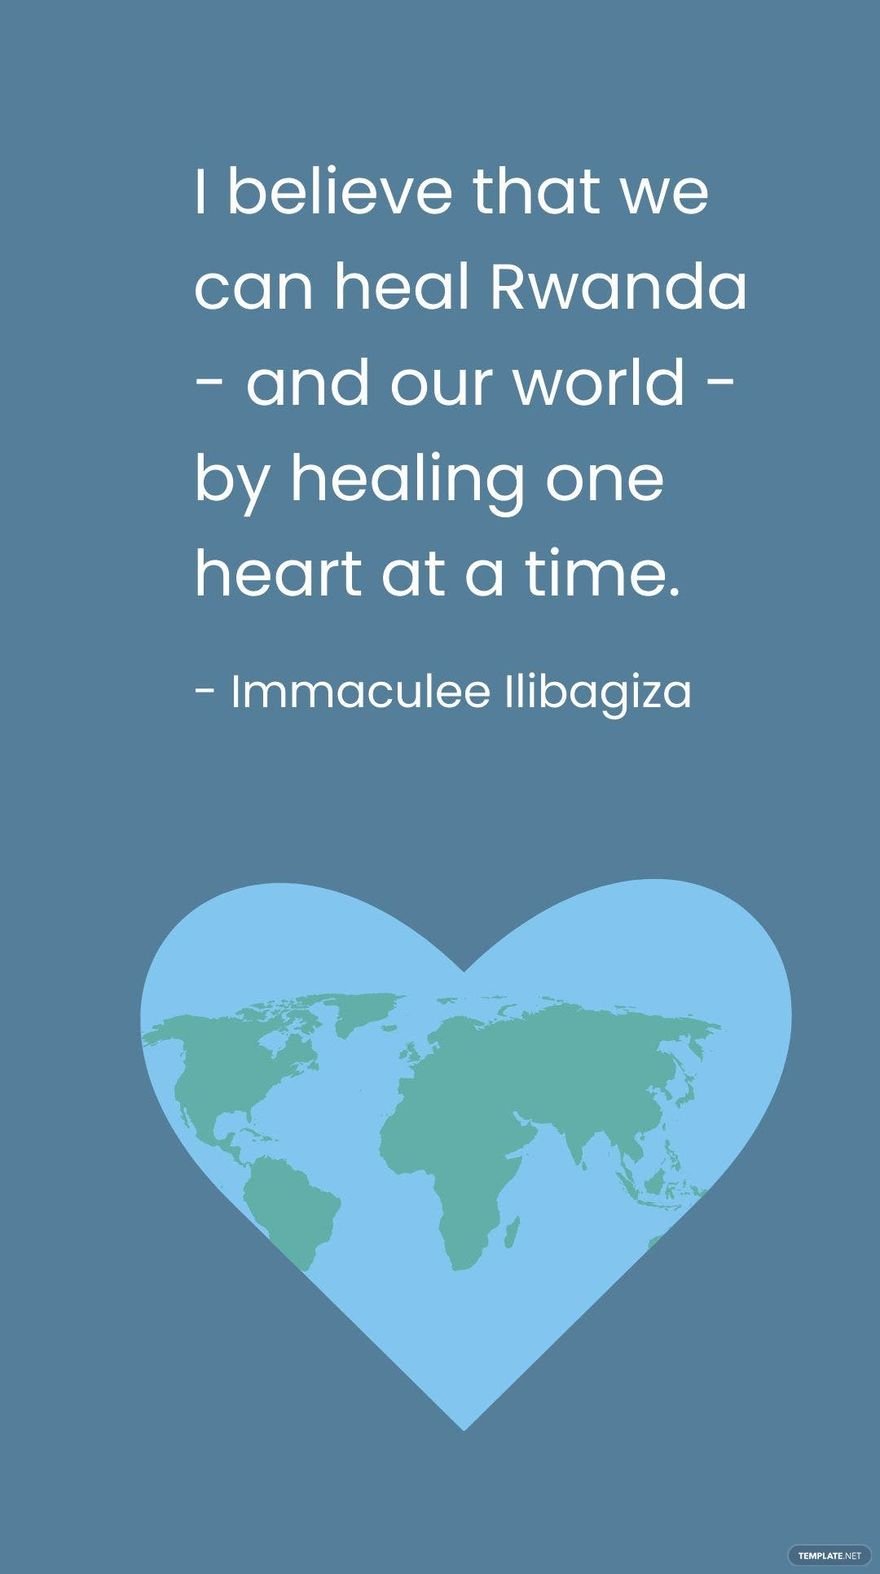 Free Immaculee Ilibagiza - I believe that we can heal Rwanda - and our world - by healing one heart at a time. in JPG